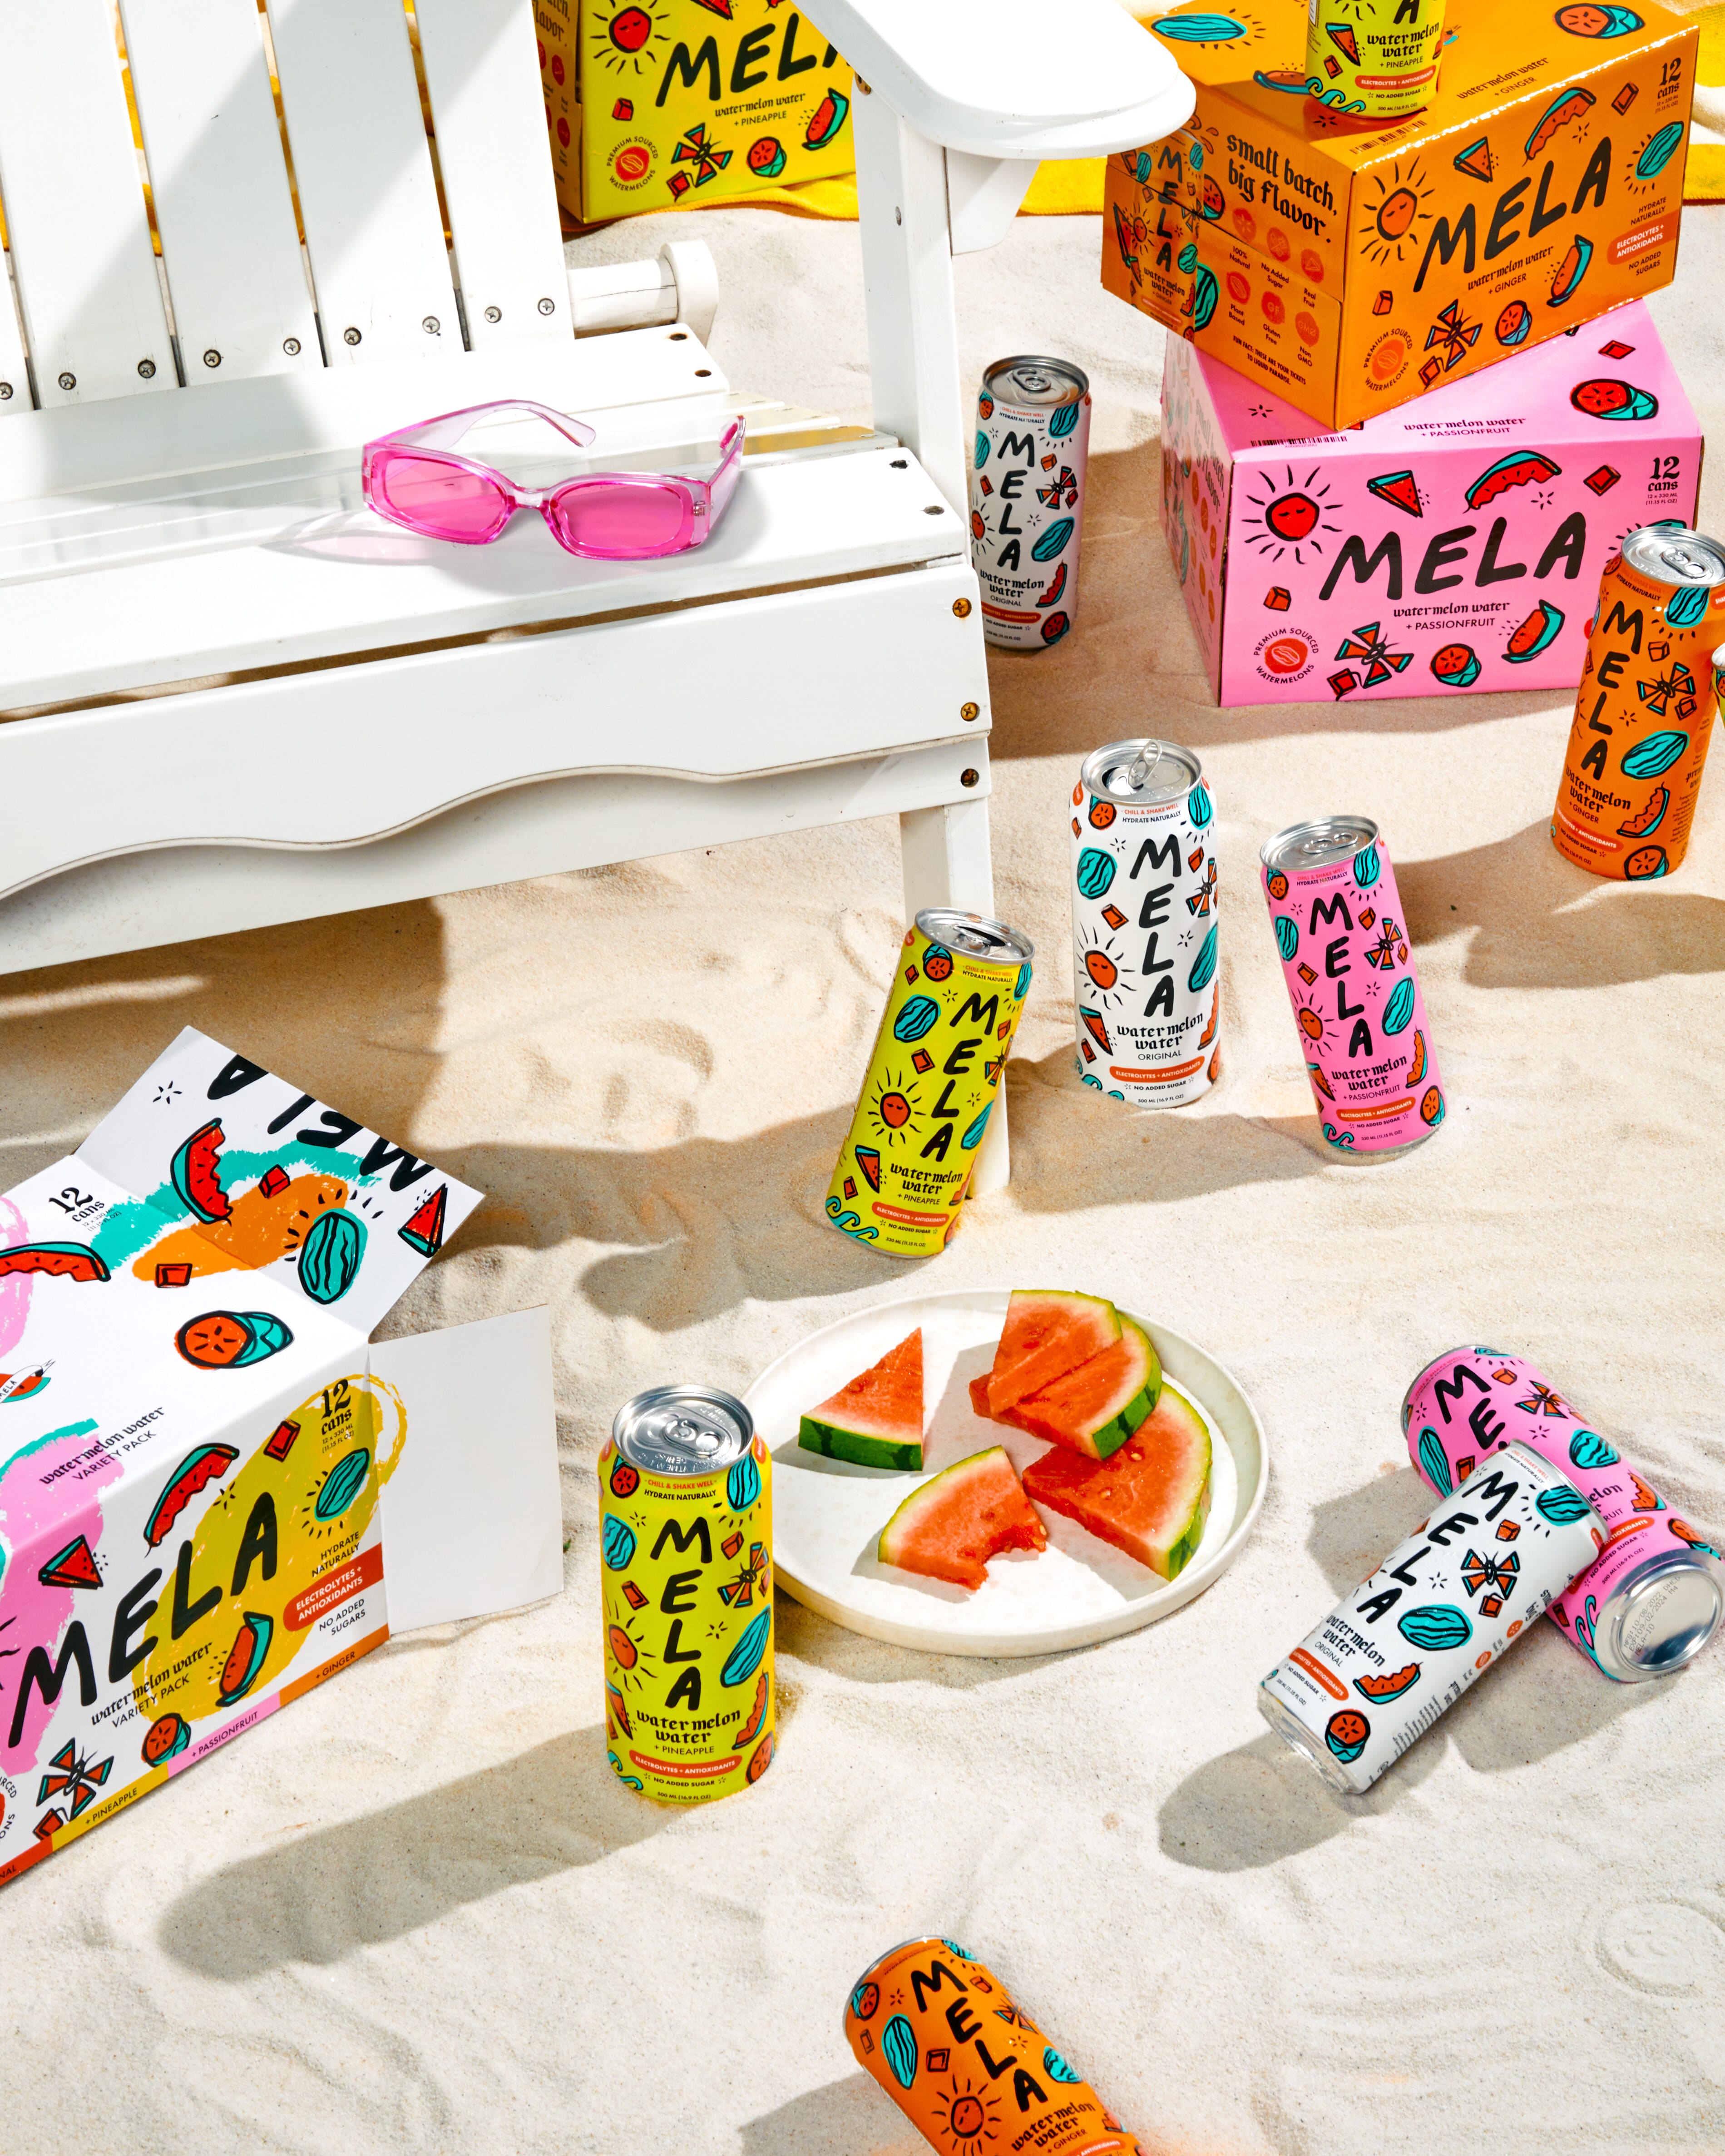 Launched in 2021 by Dominic Purpura, Mela Water has already made a name for itself in the fast-growing beverage category, offering consumers with refreshing options to hydrate naturally